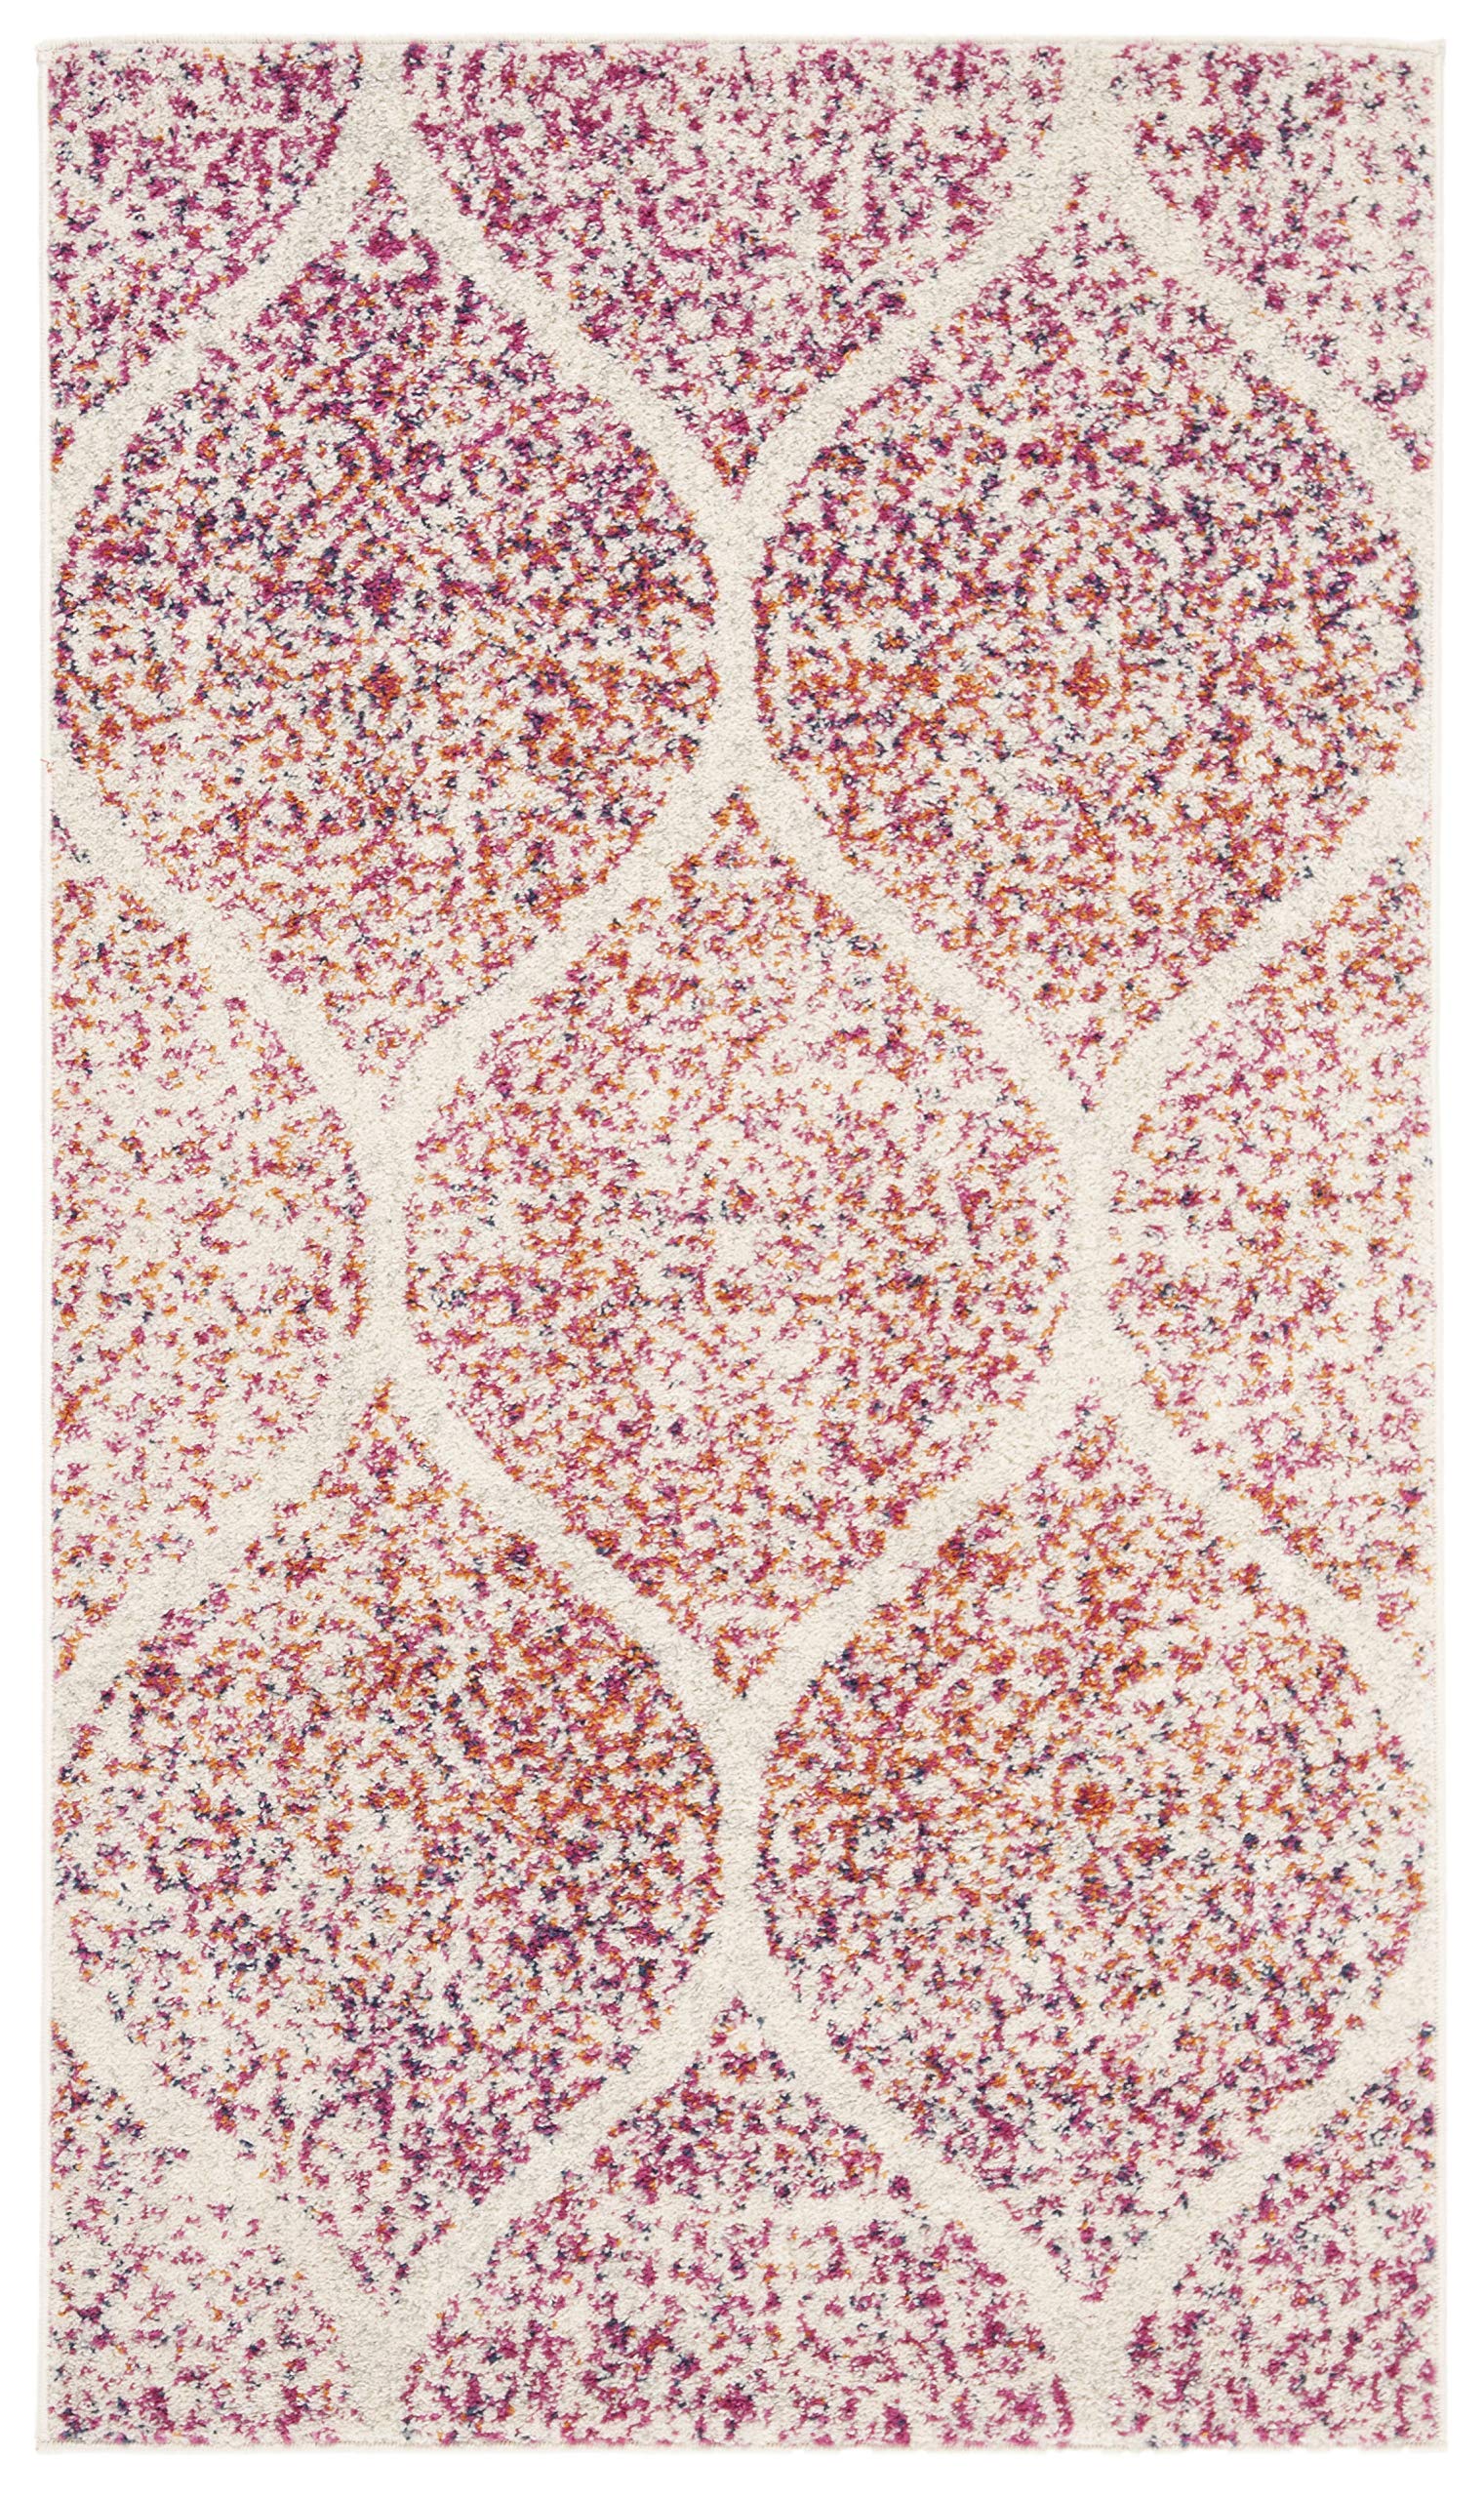  Safavieh Madison Collection Accent Rug - 2'3" x 4', Cream & Fuchsia, Glam Trellis Distressed Design, Non-Shedding & Easy Care, Ideal for High Traffic Areas in Entryway, Living...